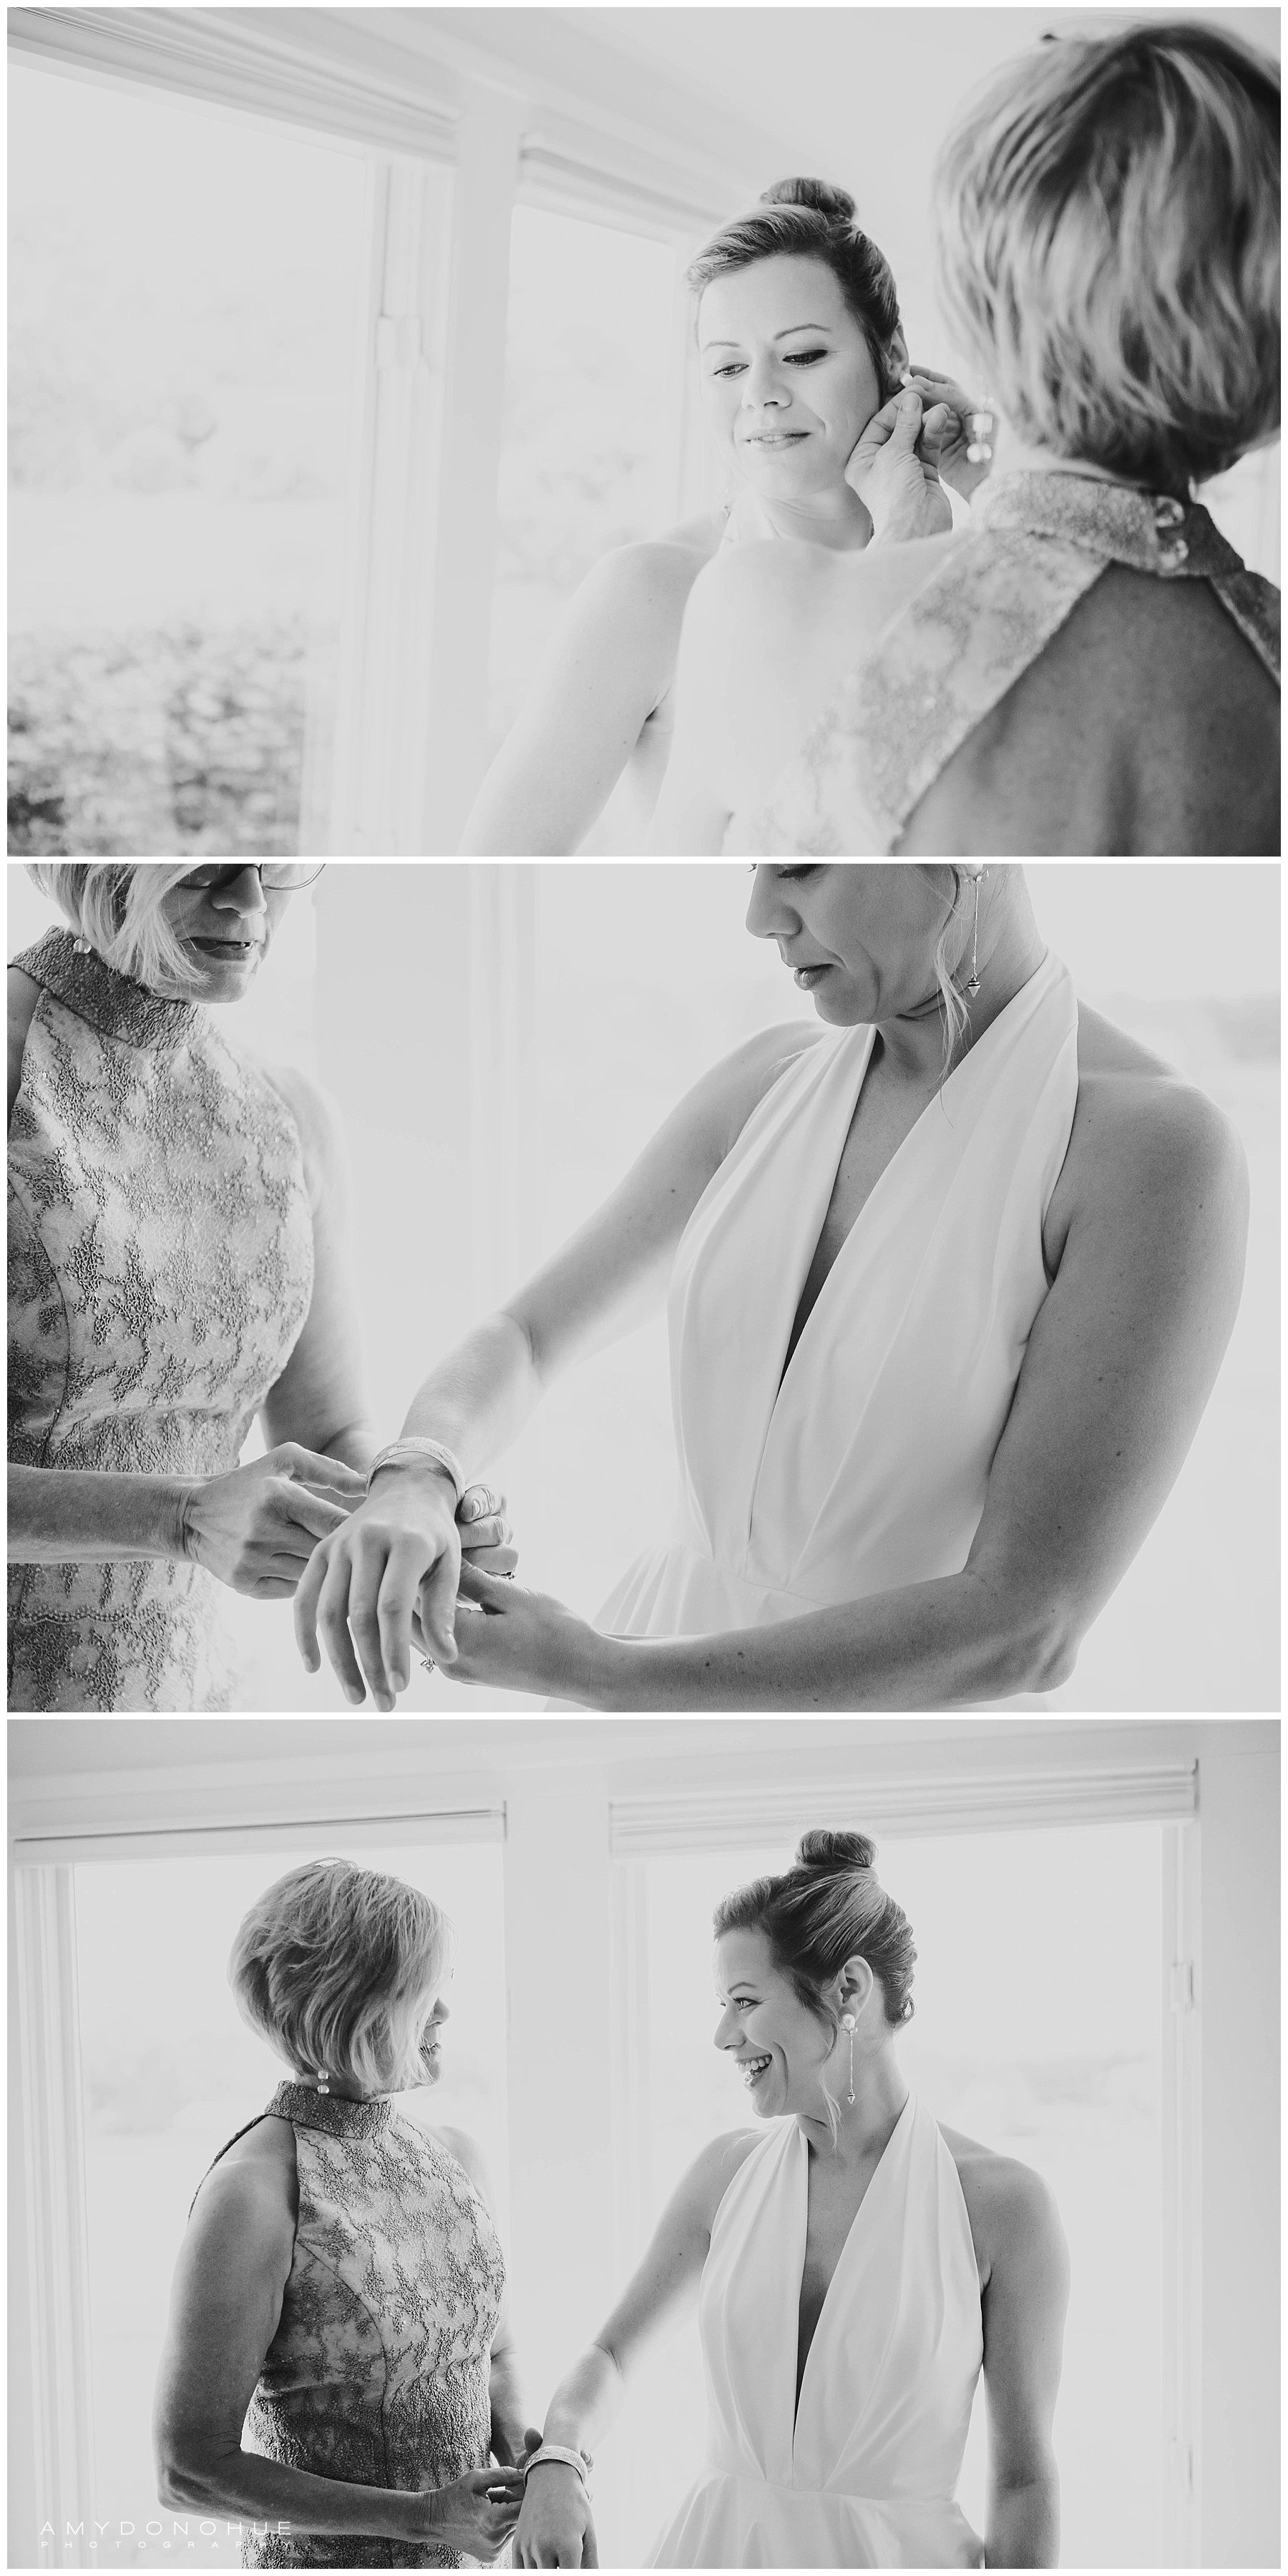 Getting into the dress | Basin Harbor Wedding Photographer | © Amy Donohue Photography